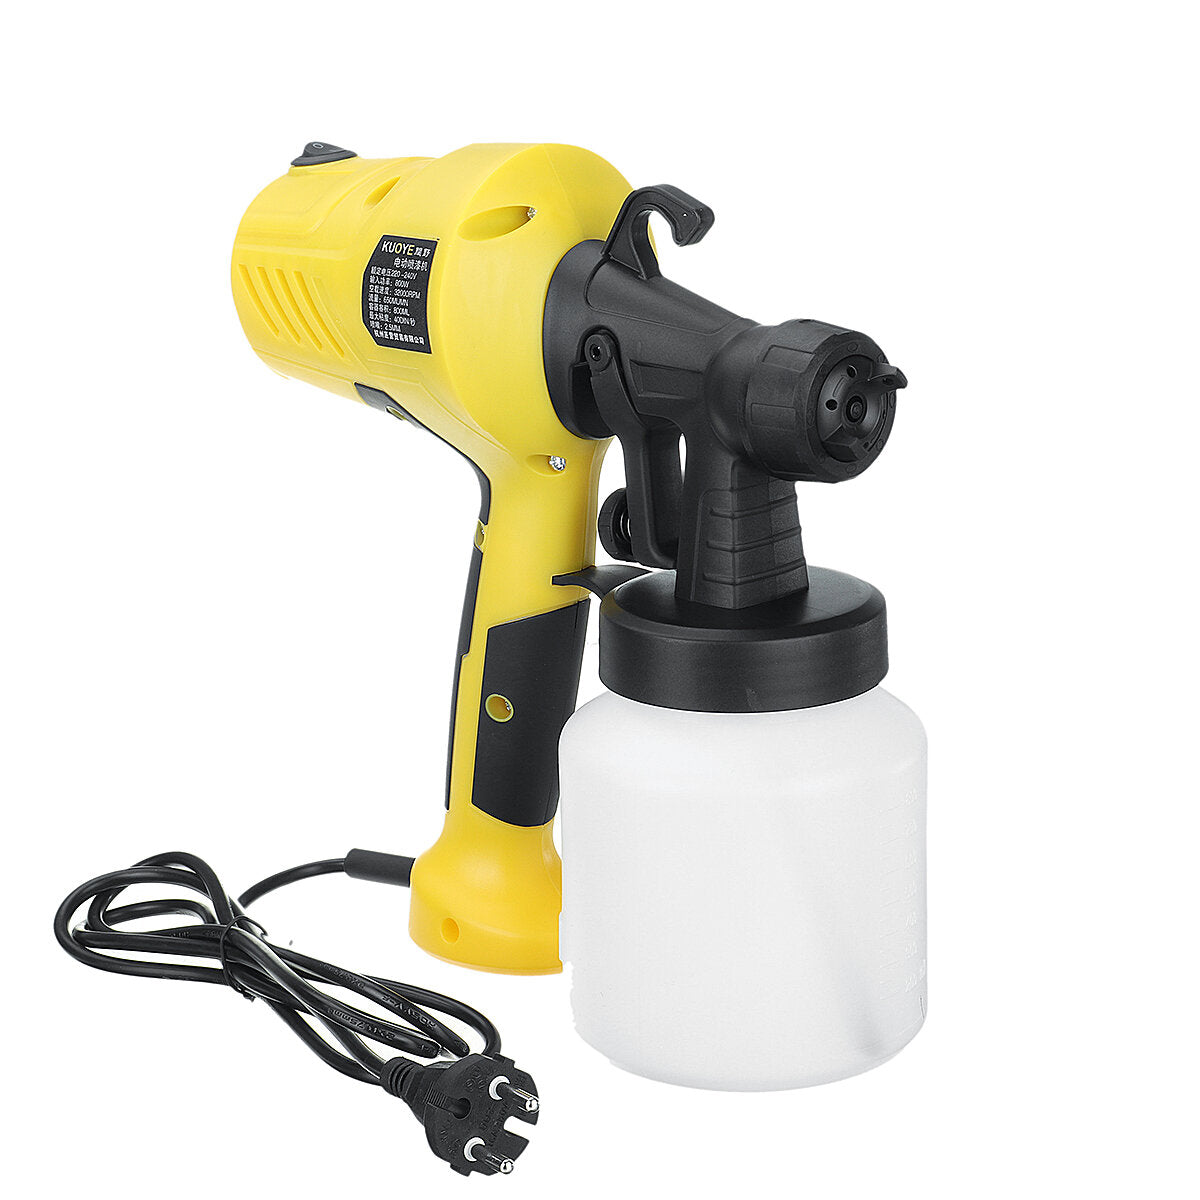 220V 800W Electric High Pressure Atomizing Spray Gun Portable Removable Formaldehyde Removal Latex Paint Spray Tool